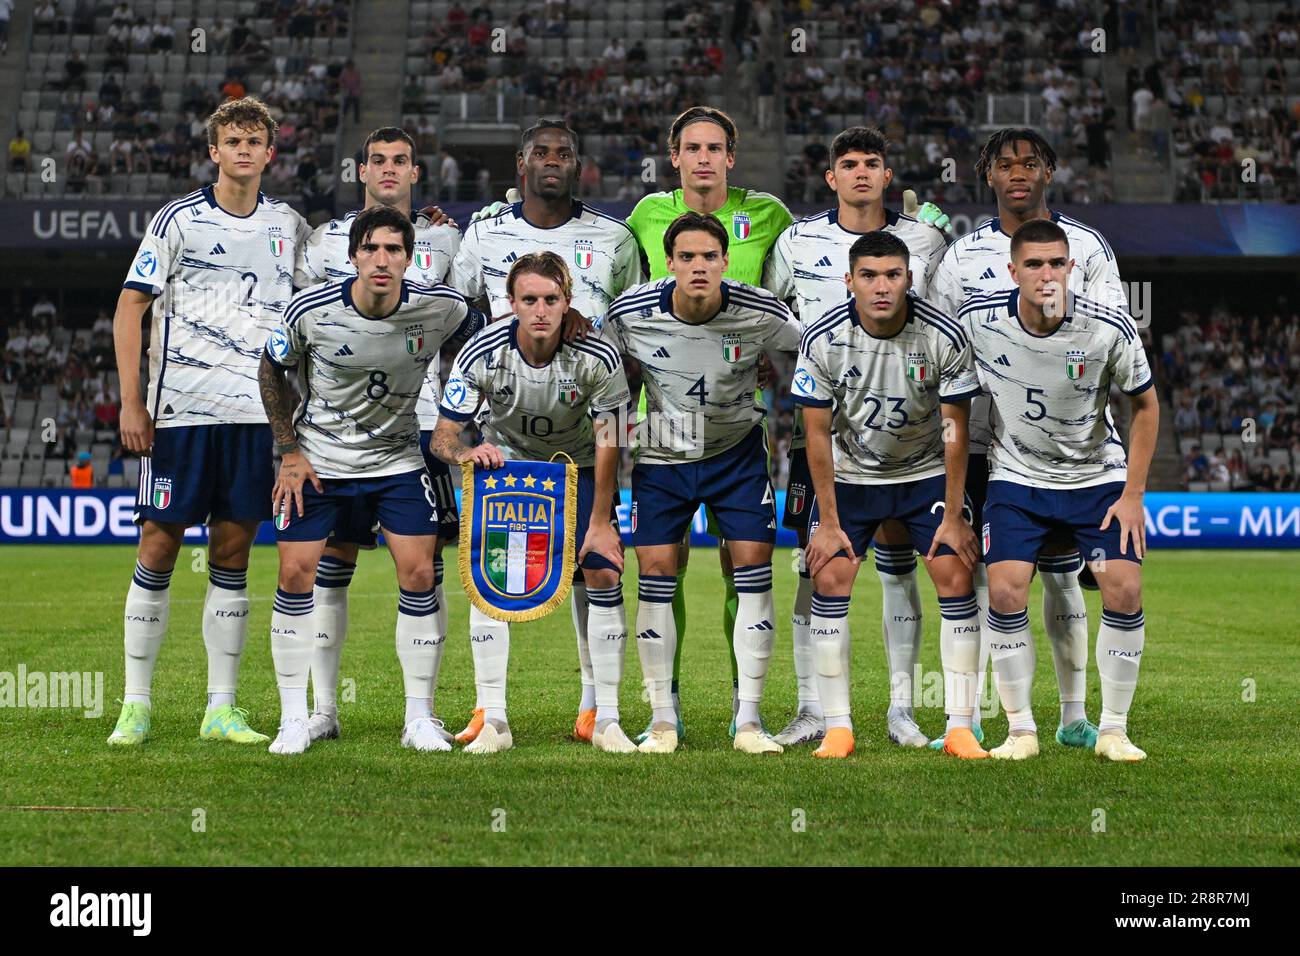 Cluj Napoca, Romania. 22nd June, 2023. Italy U21 for team photo lined up during the first qualifying round UEFA European Under-21 Championship 2023 soccer match Italy U21 vs. France U21 at the Cluj Arena stadium in Cluj Napoca, Romania, 22nd of June 2023 Credit: Live Media Publishing Group/Alamy Live News Stock Photo